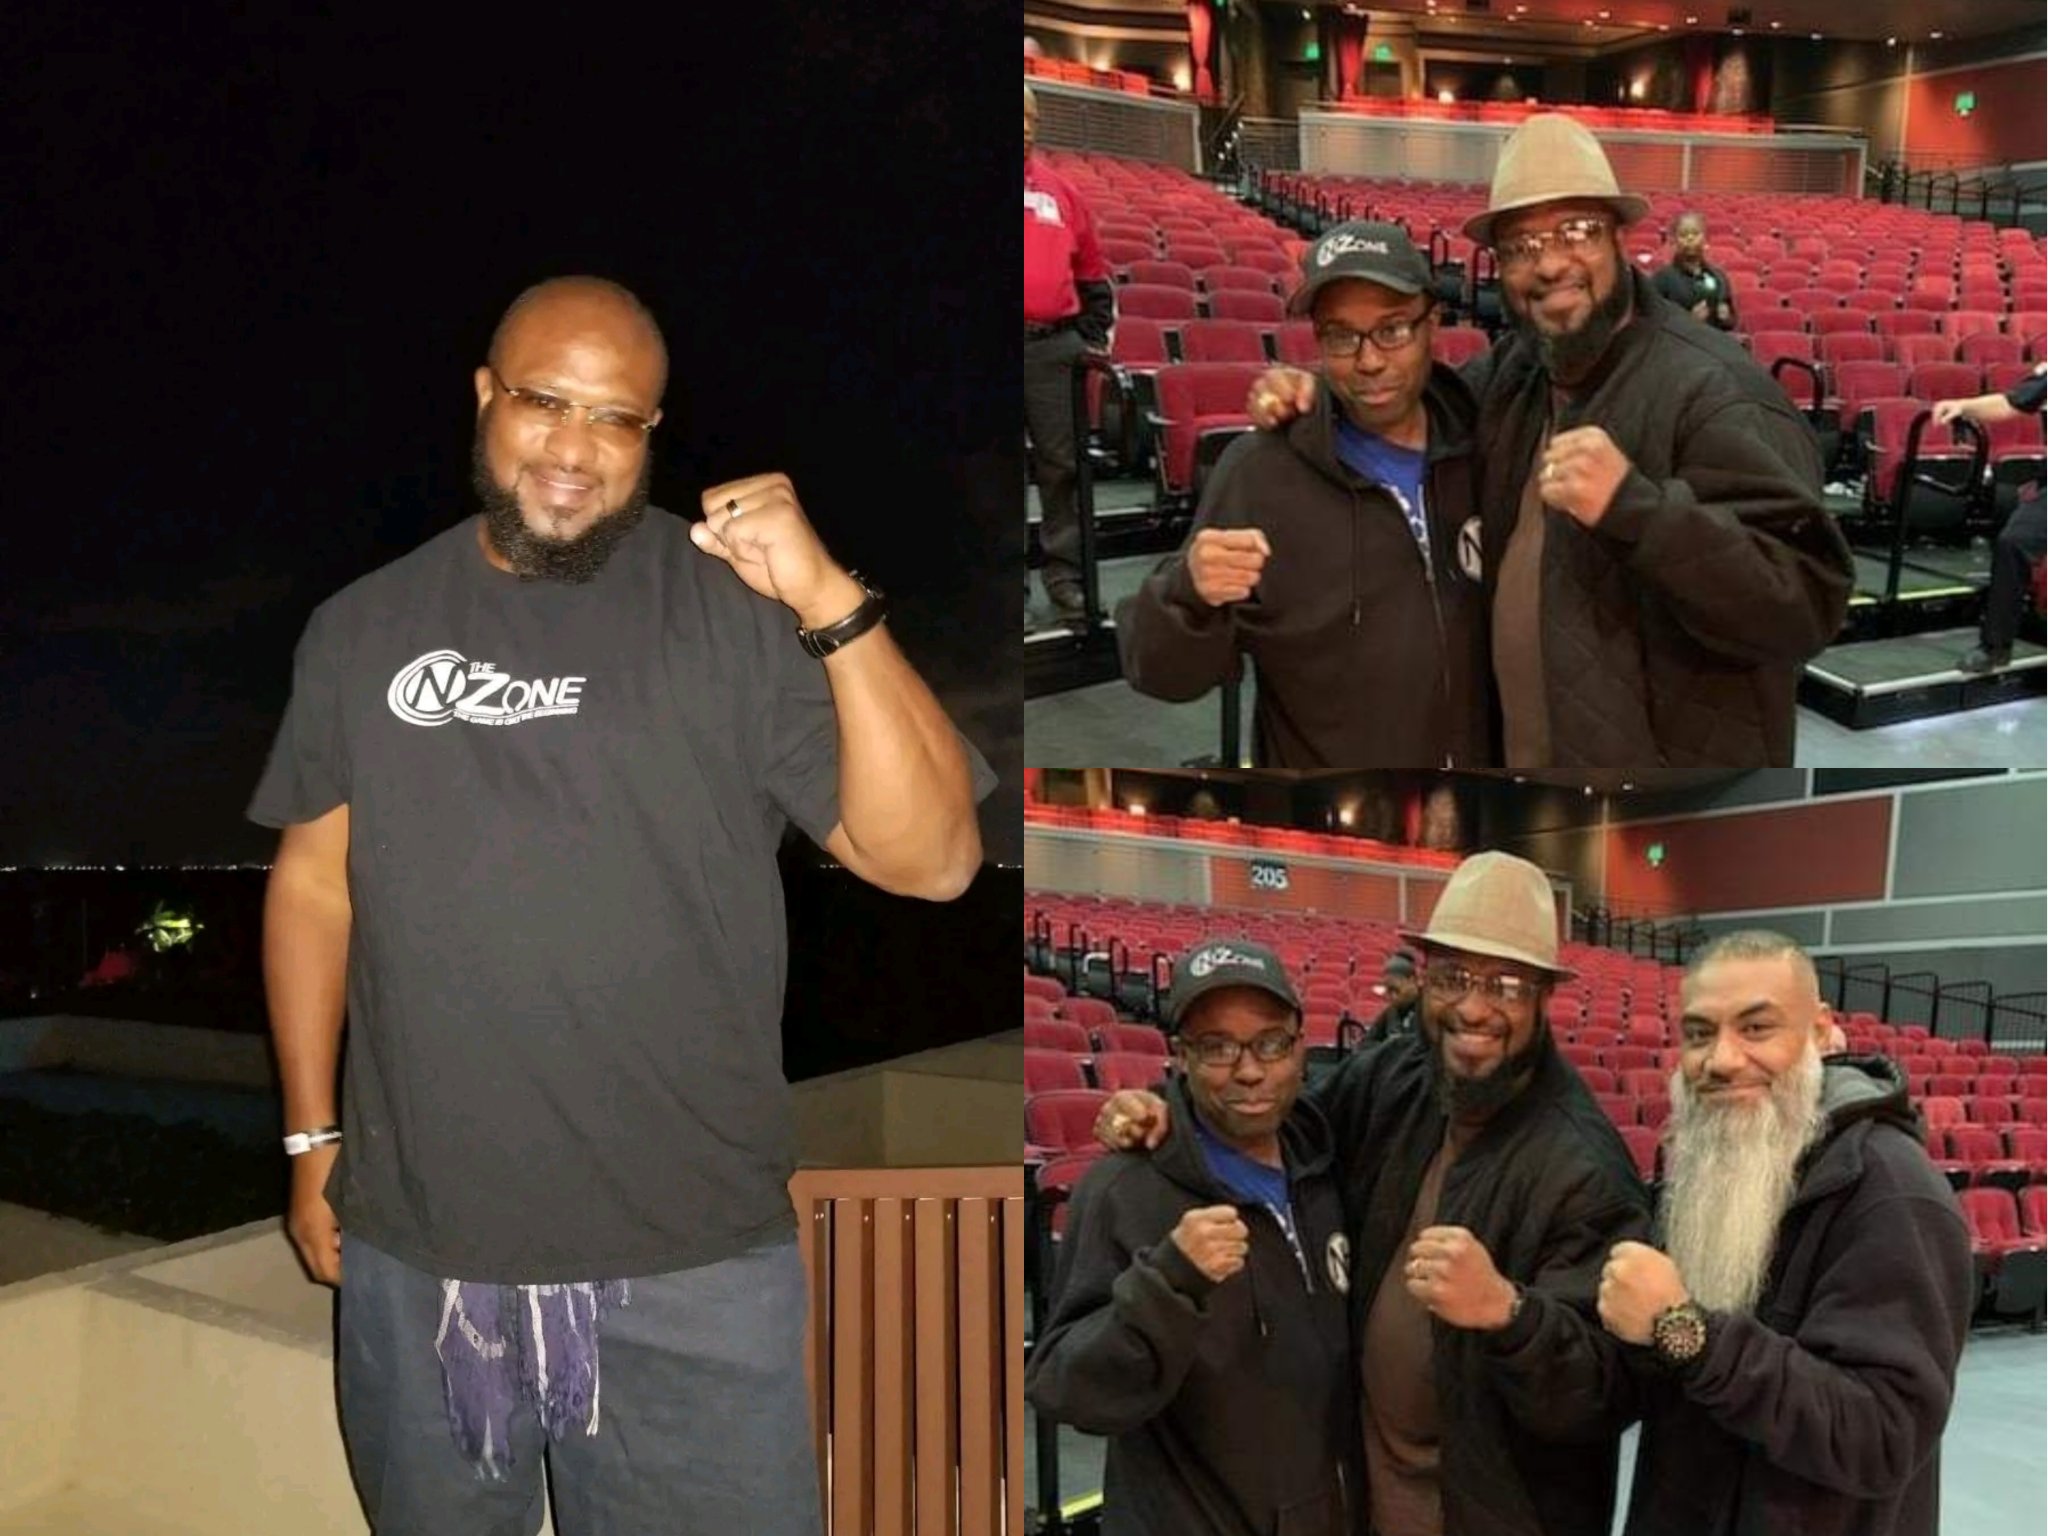 N\ The Zone
Happy Birthday Cousin
Lamon Brewster
Former Heavyweight Boxing The Game is Only The Beginning 